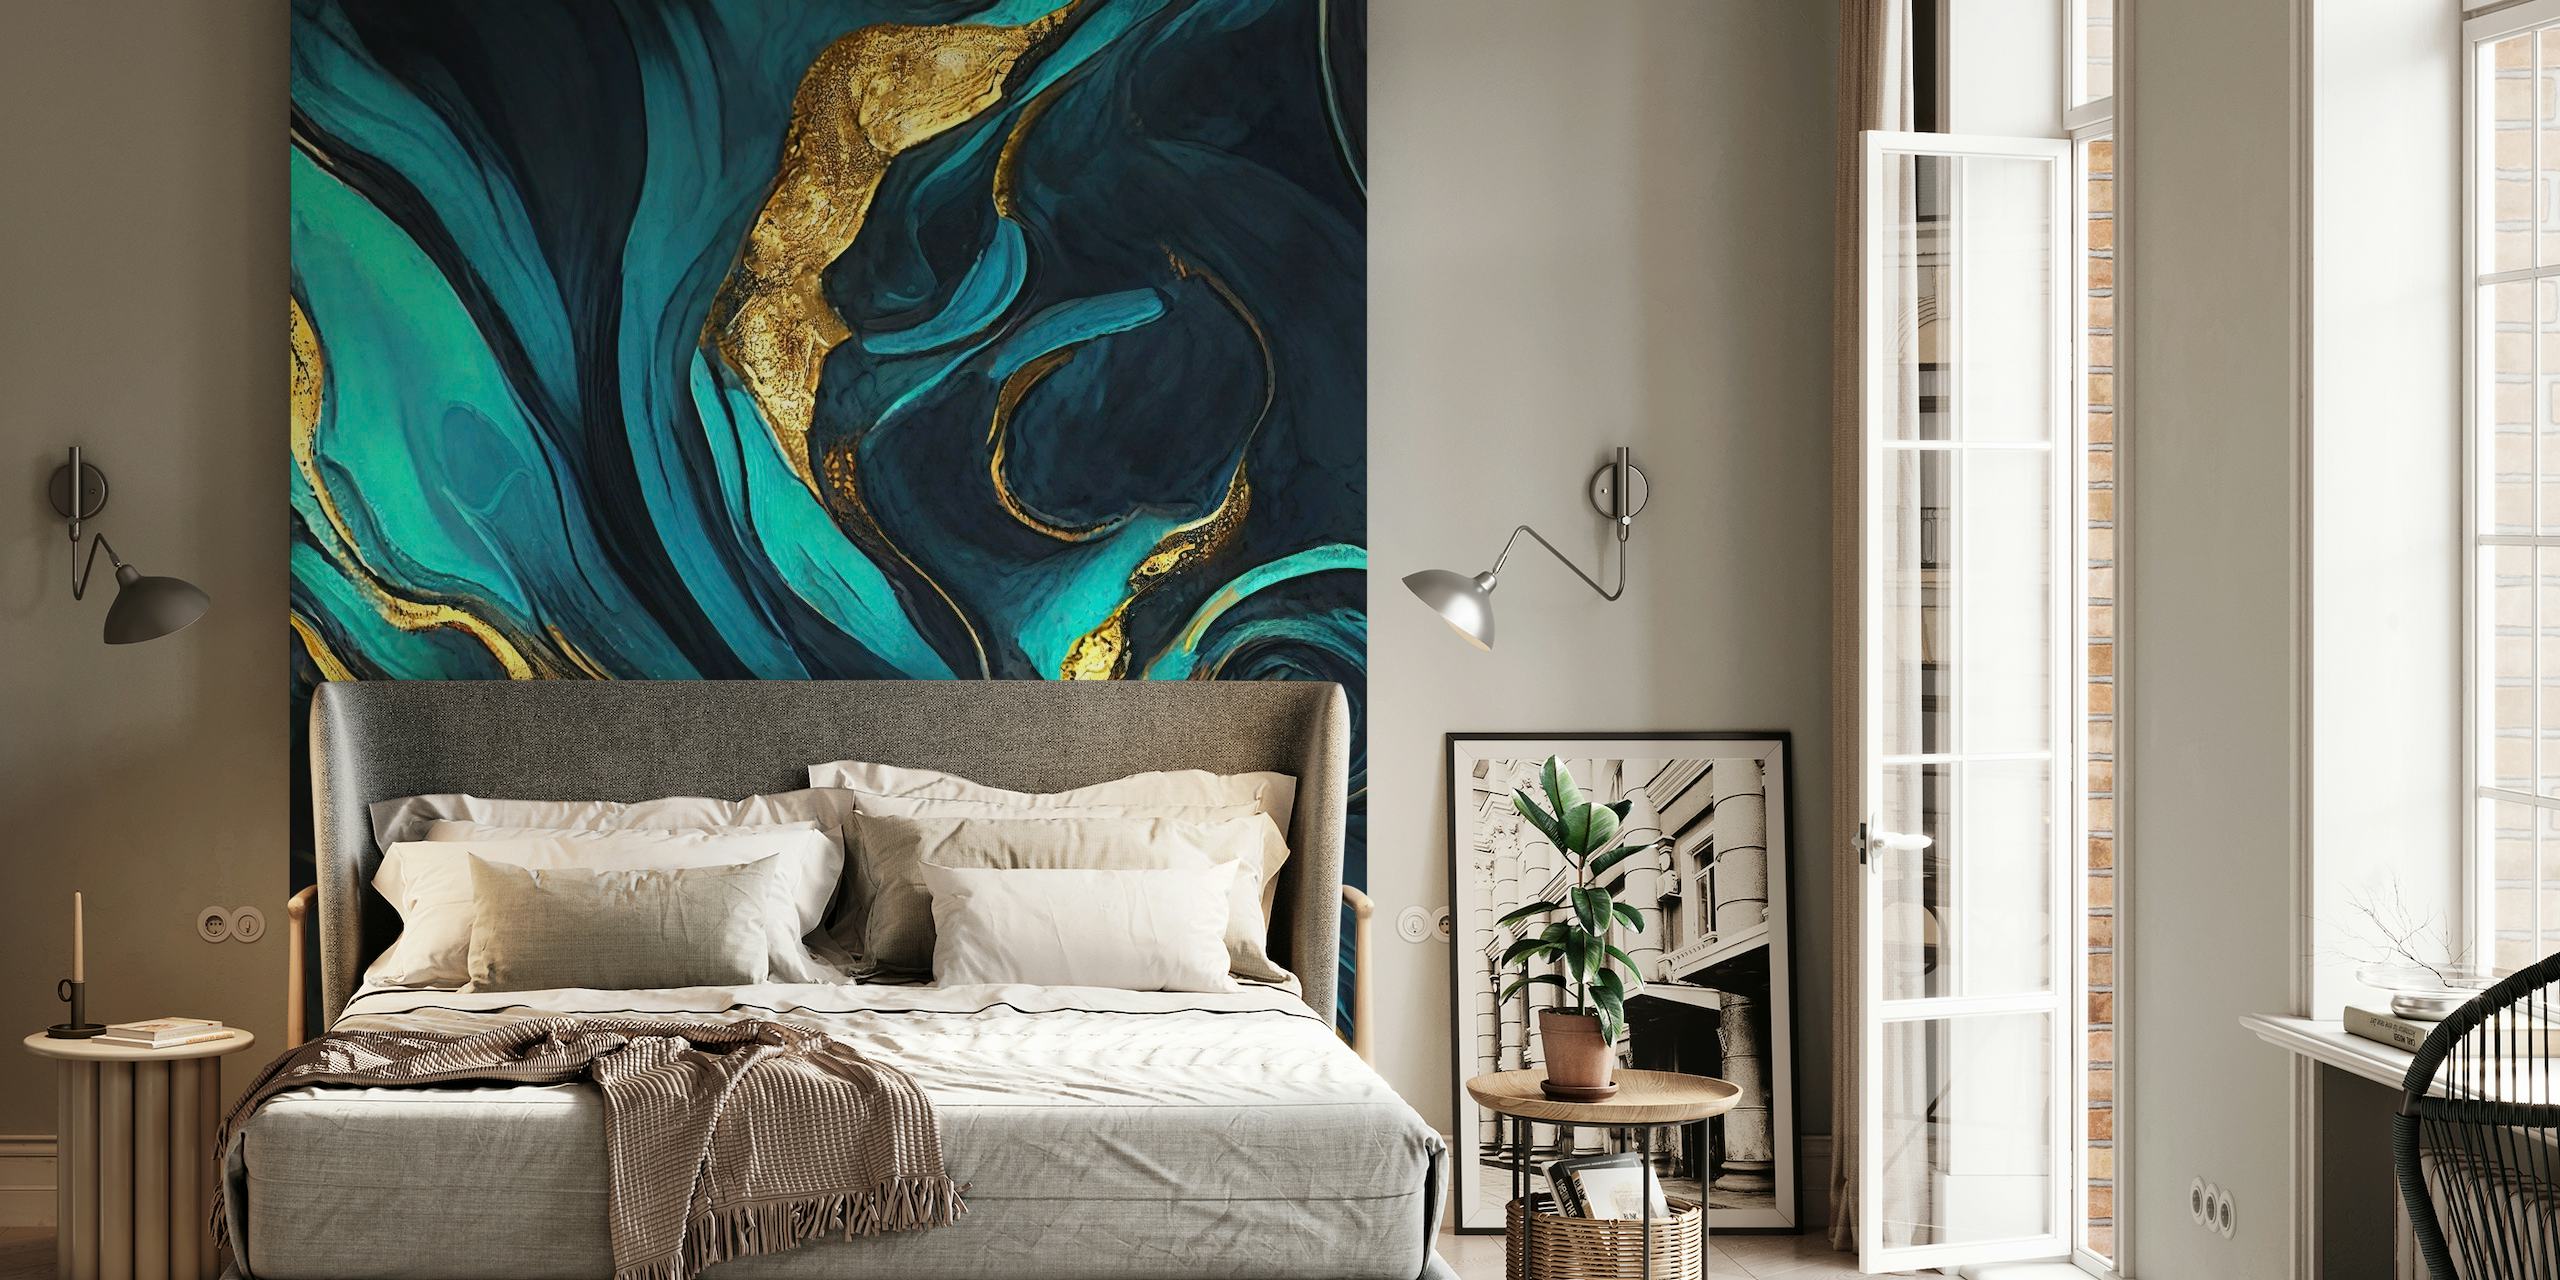 Teal and gold marble pattern wall mural